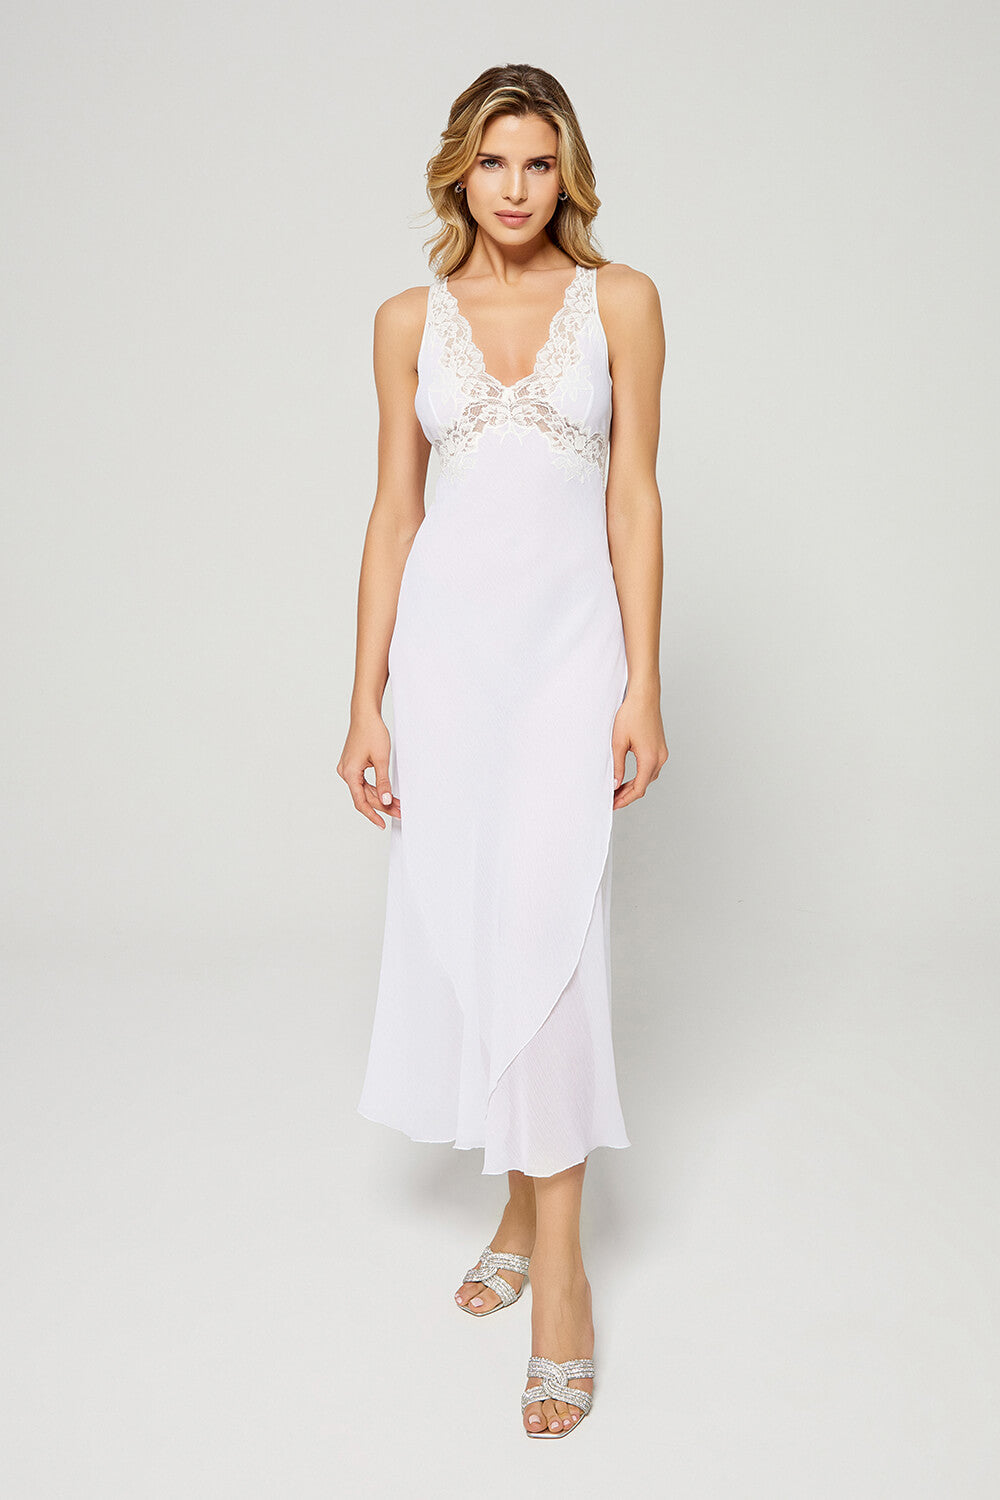 Fearne - Long Envelope Silk Nightgown - White Lace on White